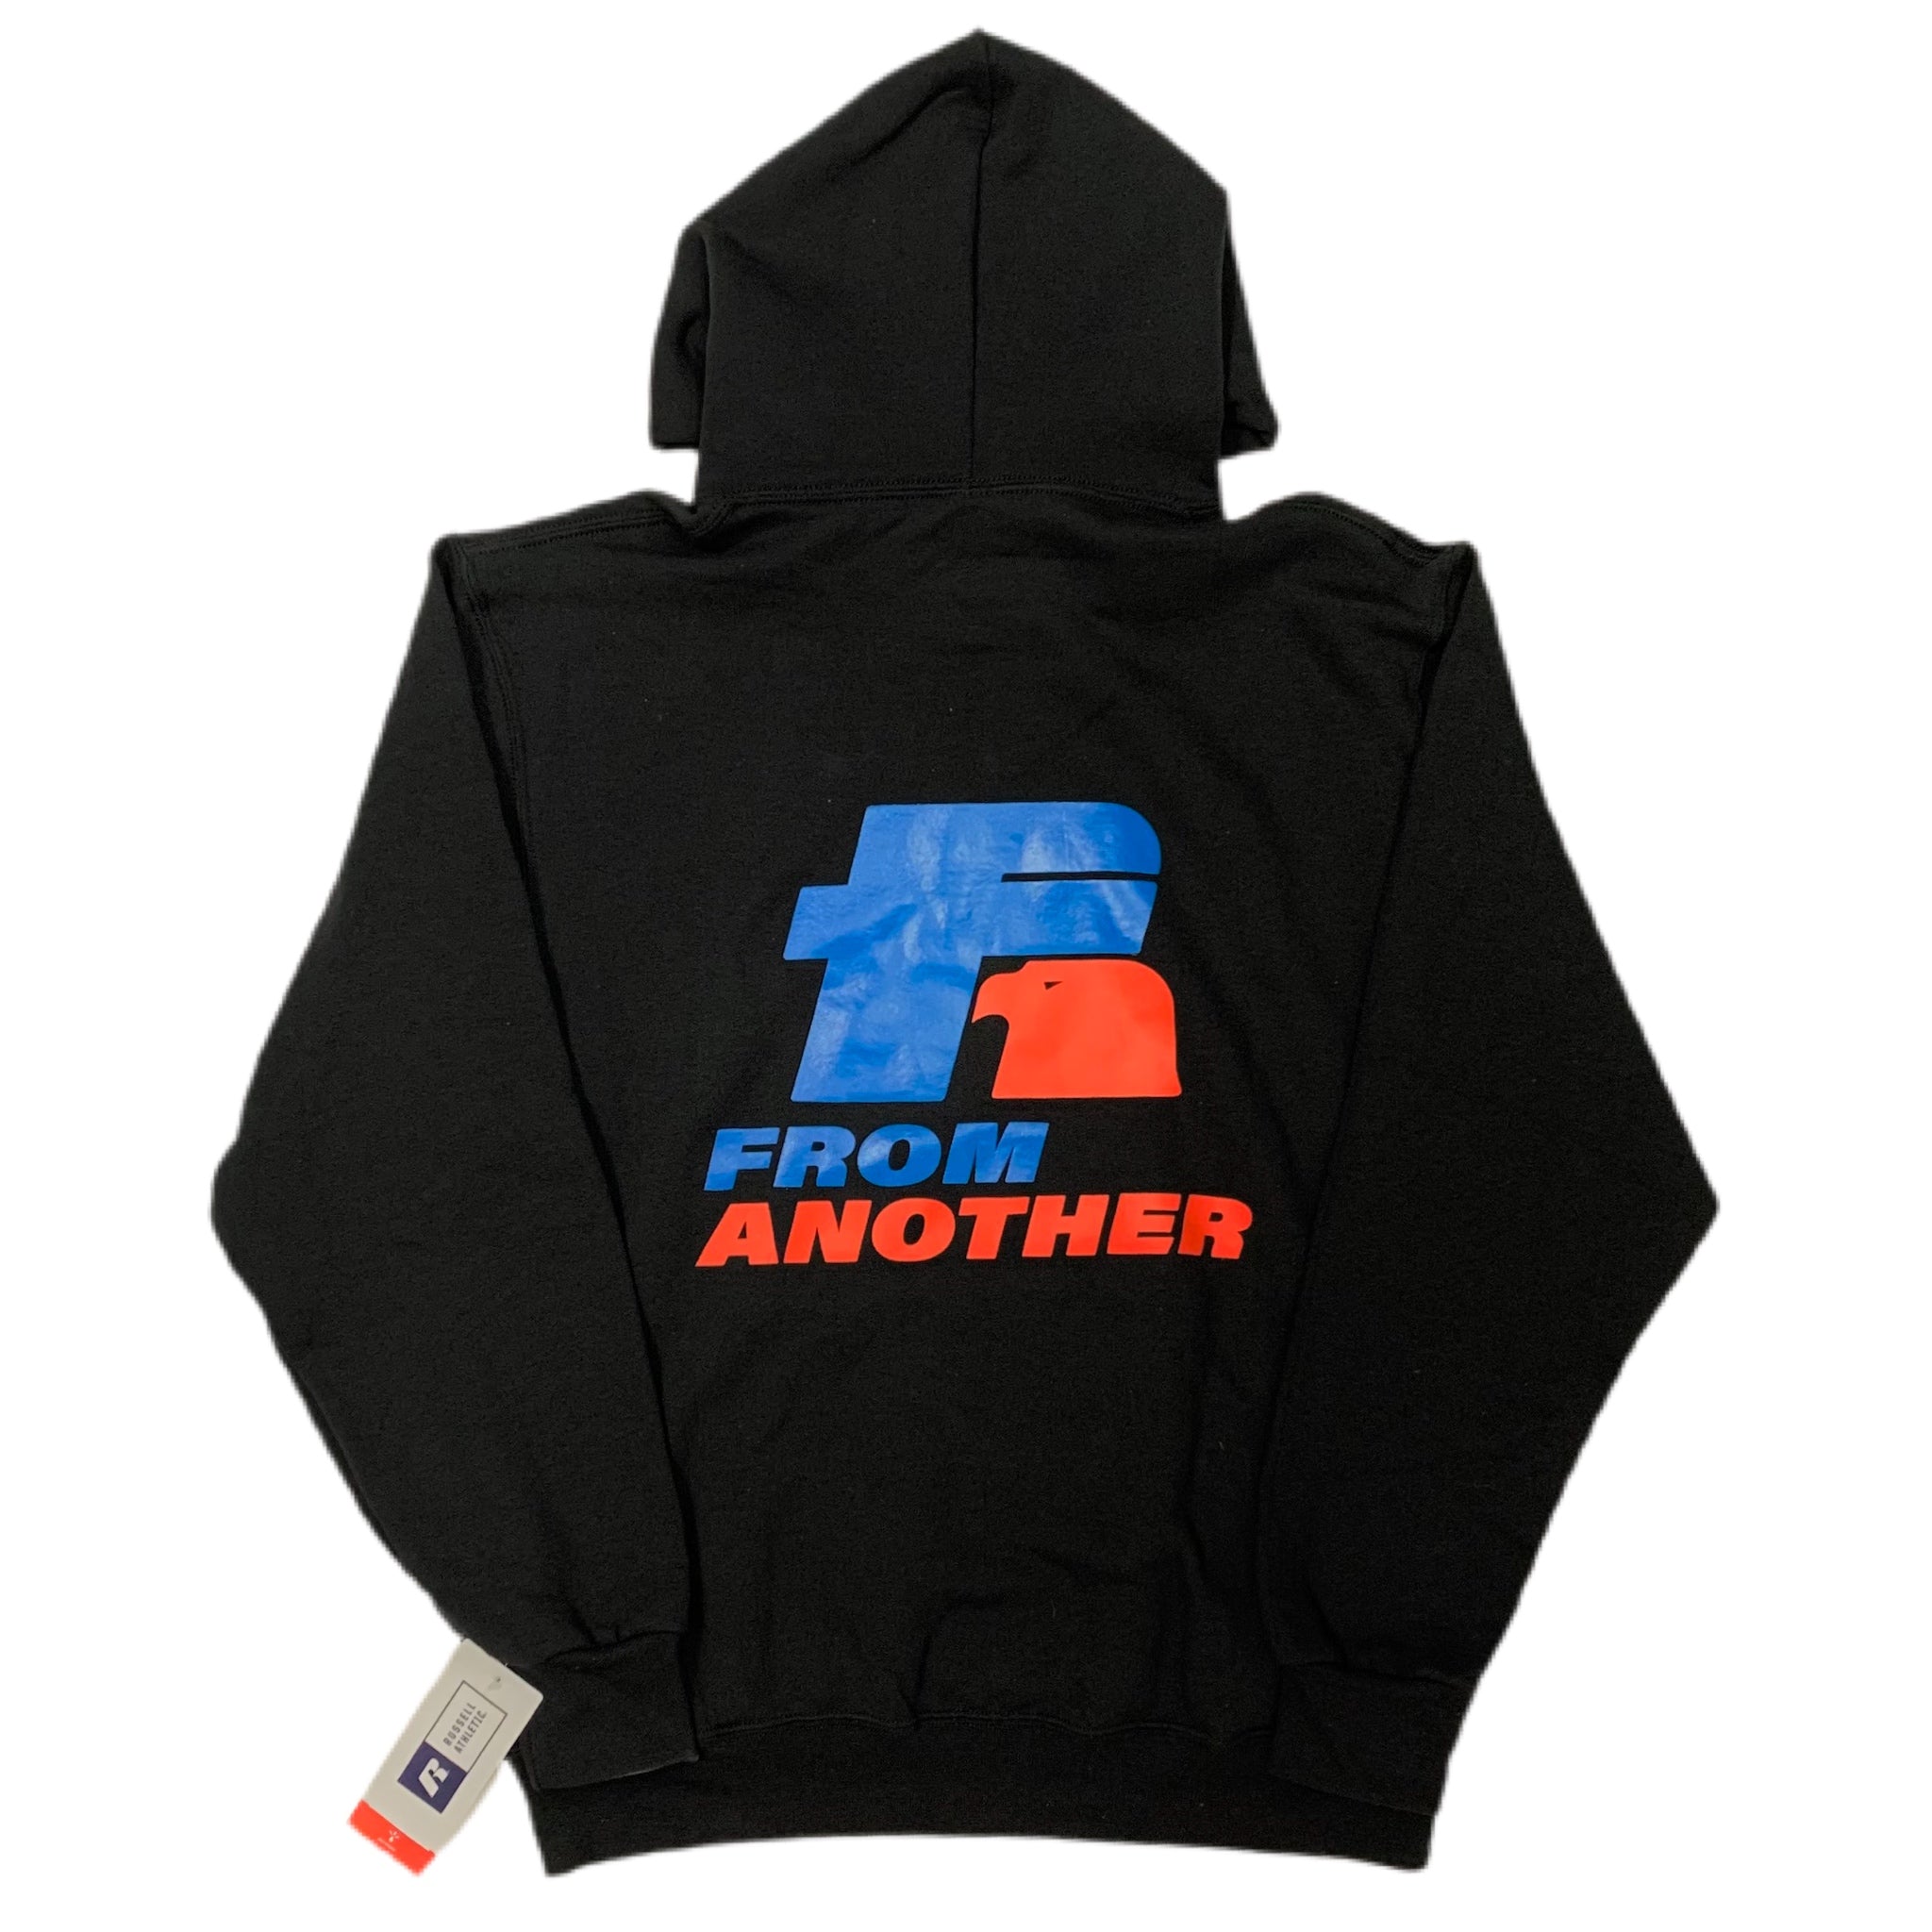 From Another Athletic Hoodie Black